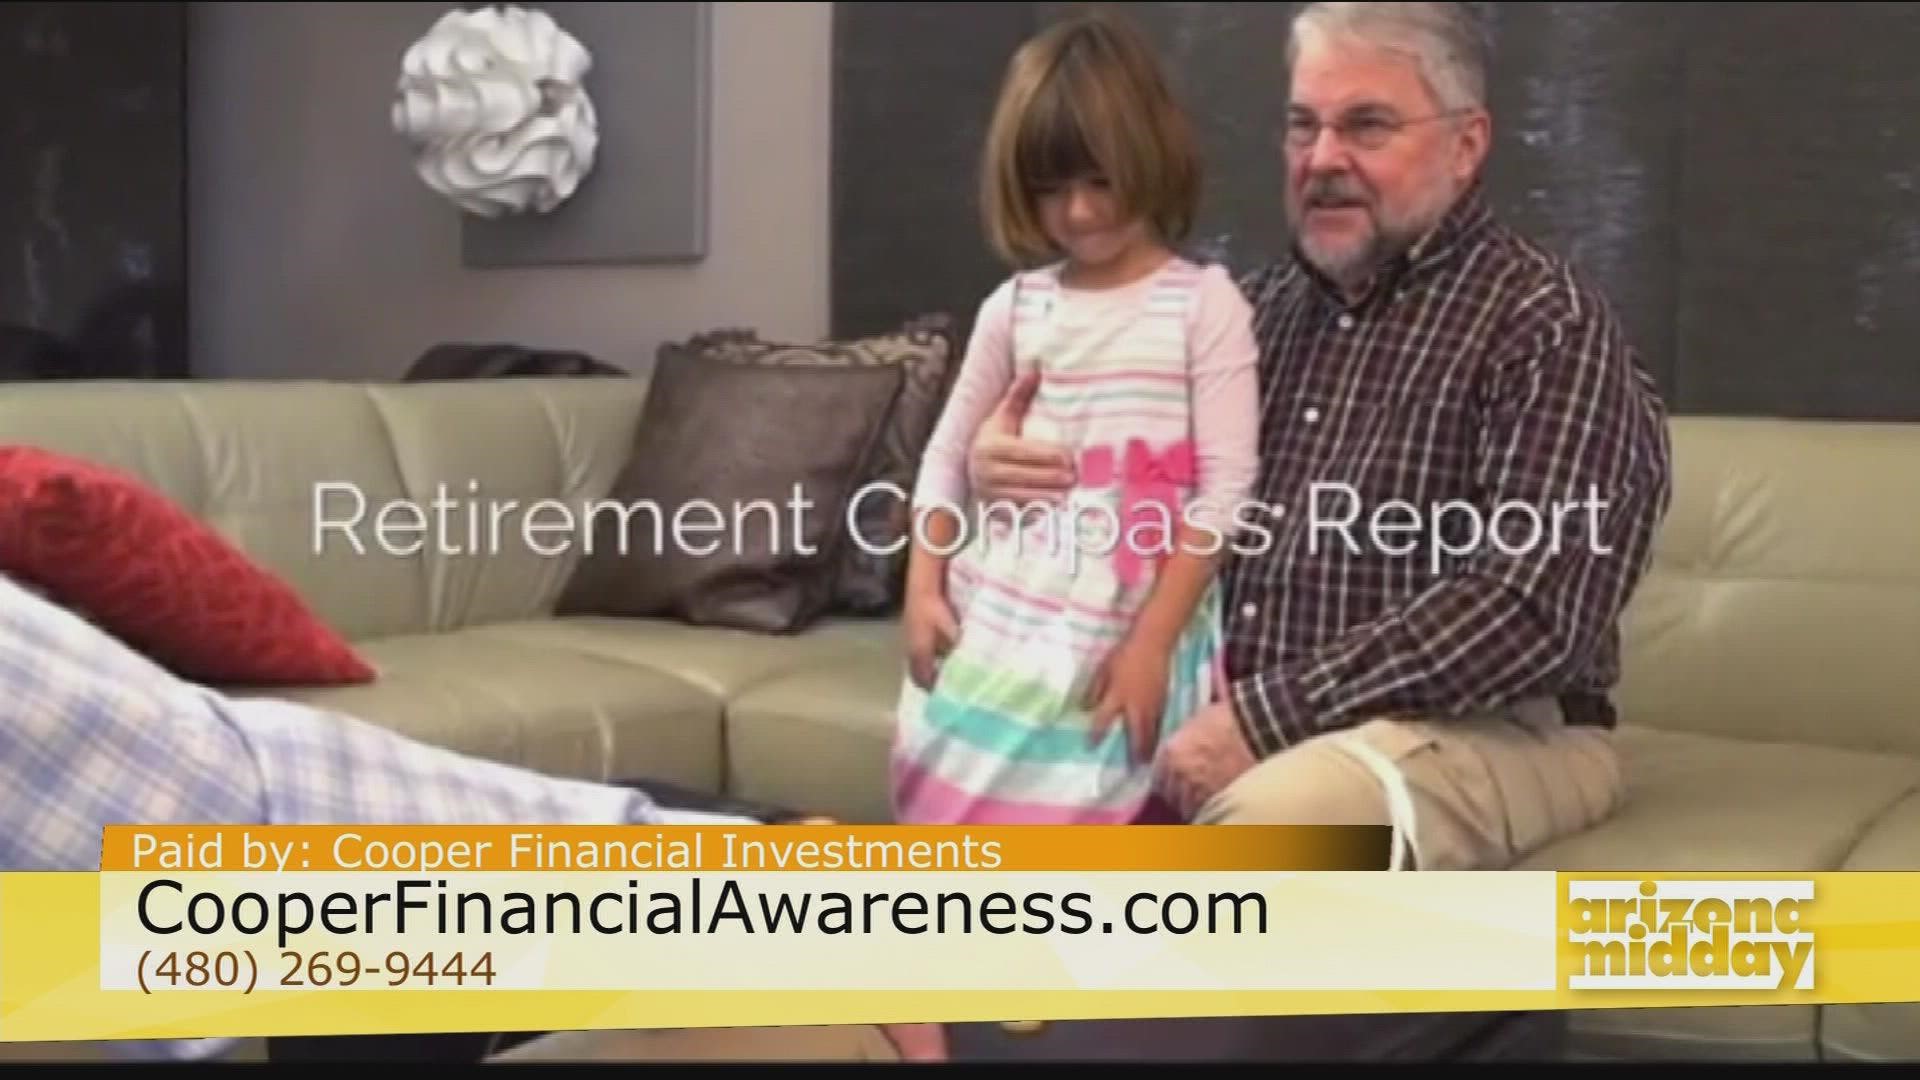 Brad Cooper, President of Cooper Financial Investments, shares how to take control of your retirement and plan for the future